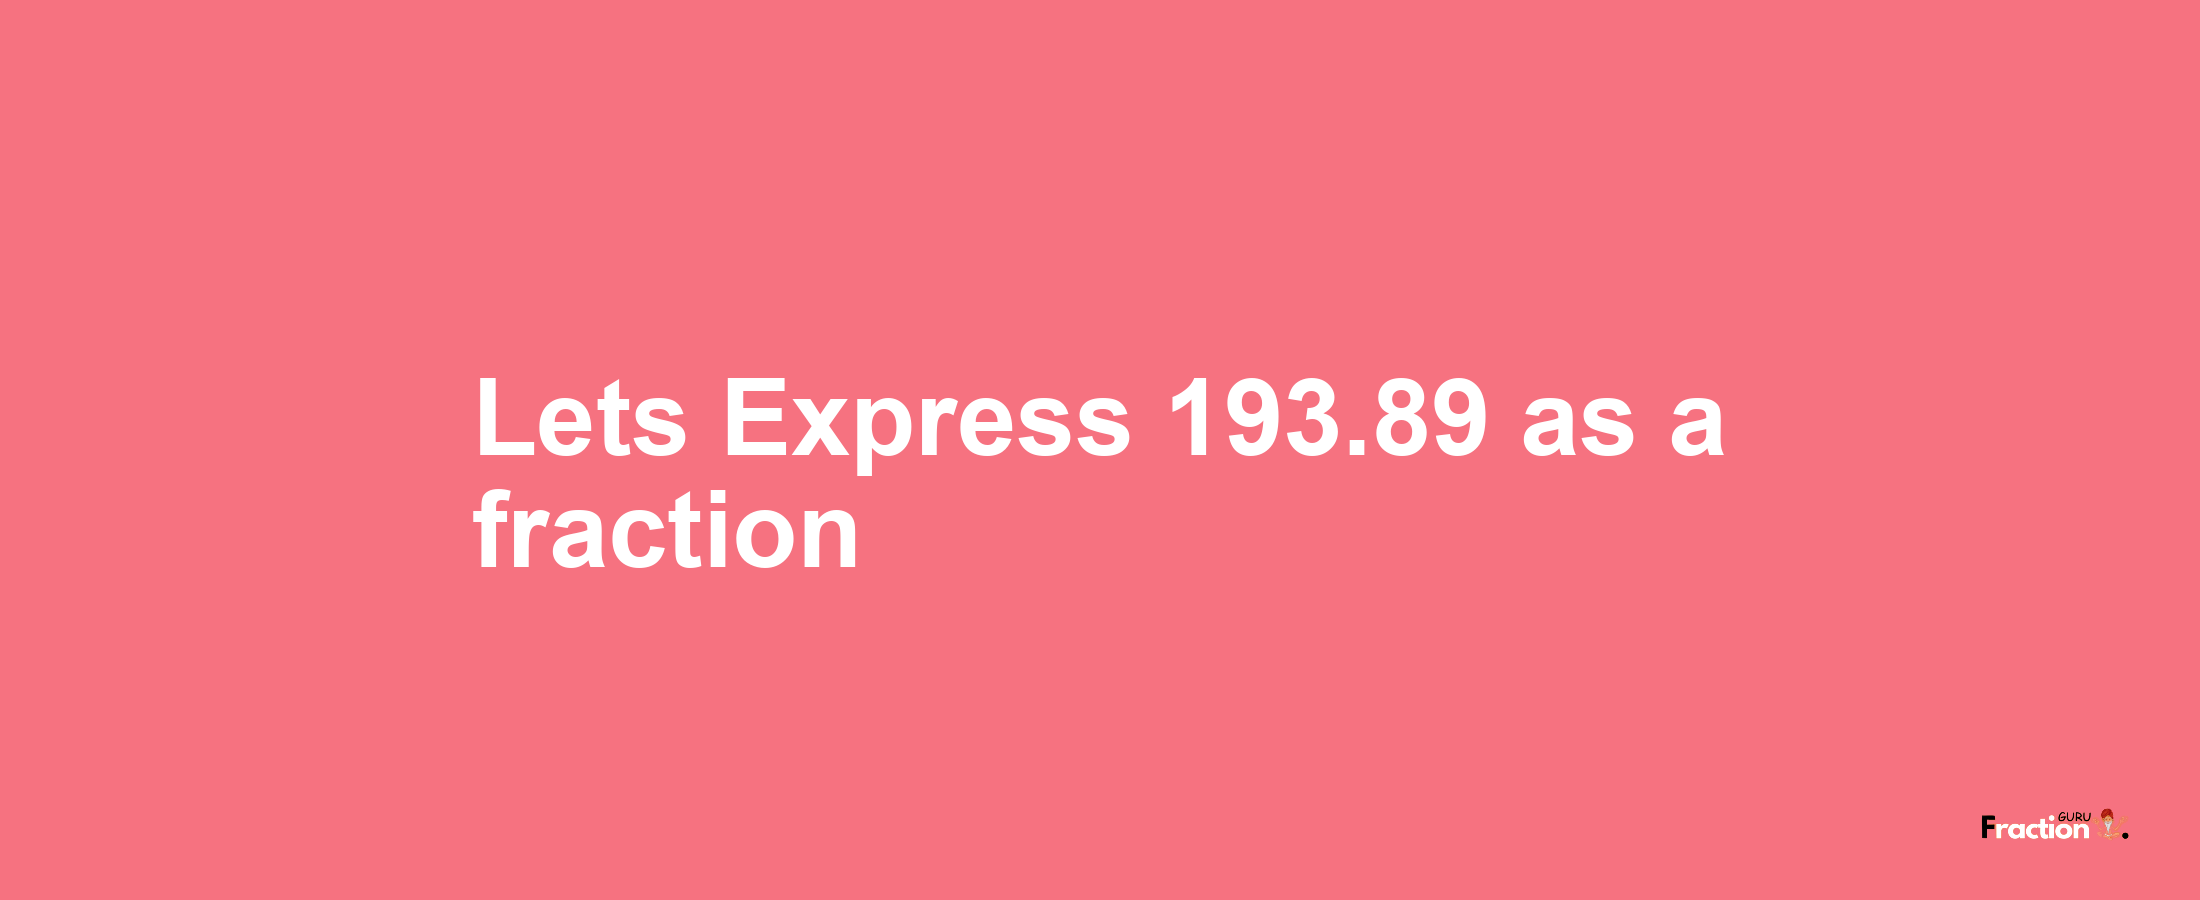 Lets Express 193.89 as afraction